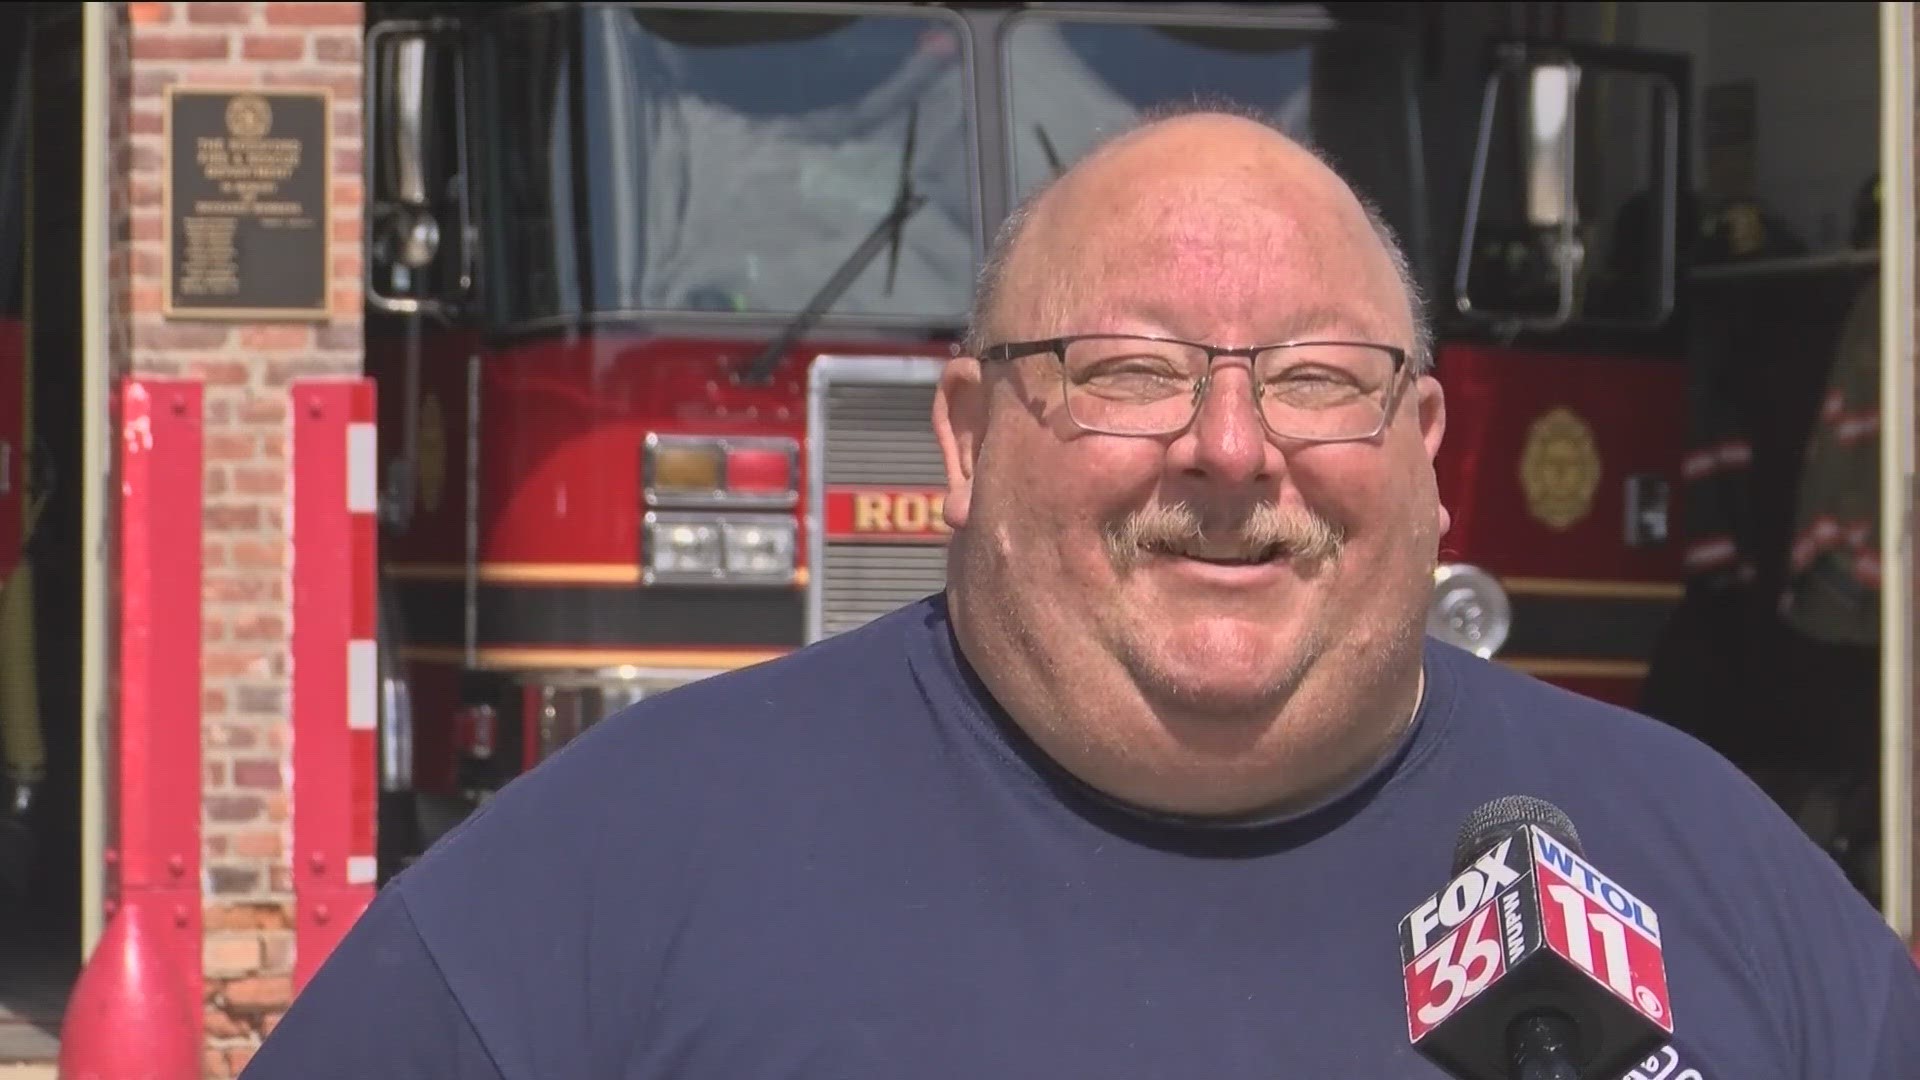 Rossford Fire Chief Josh Drouard said his last day with the department is May 31. His retirement comes as the fire department deals with  a staffing shortage.